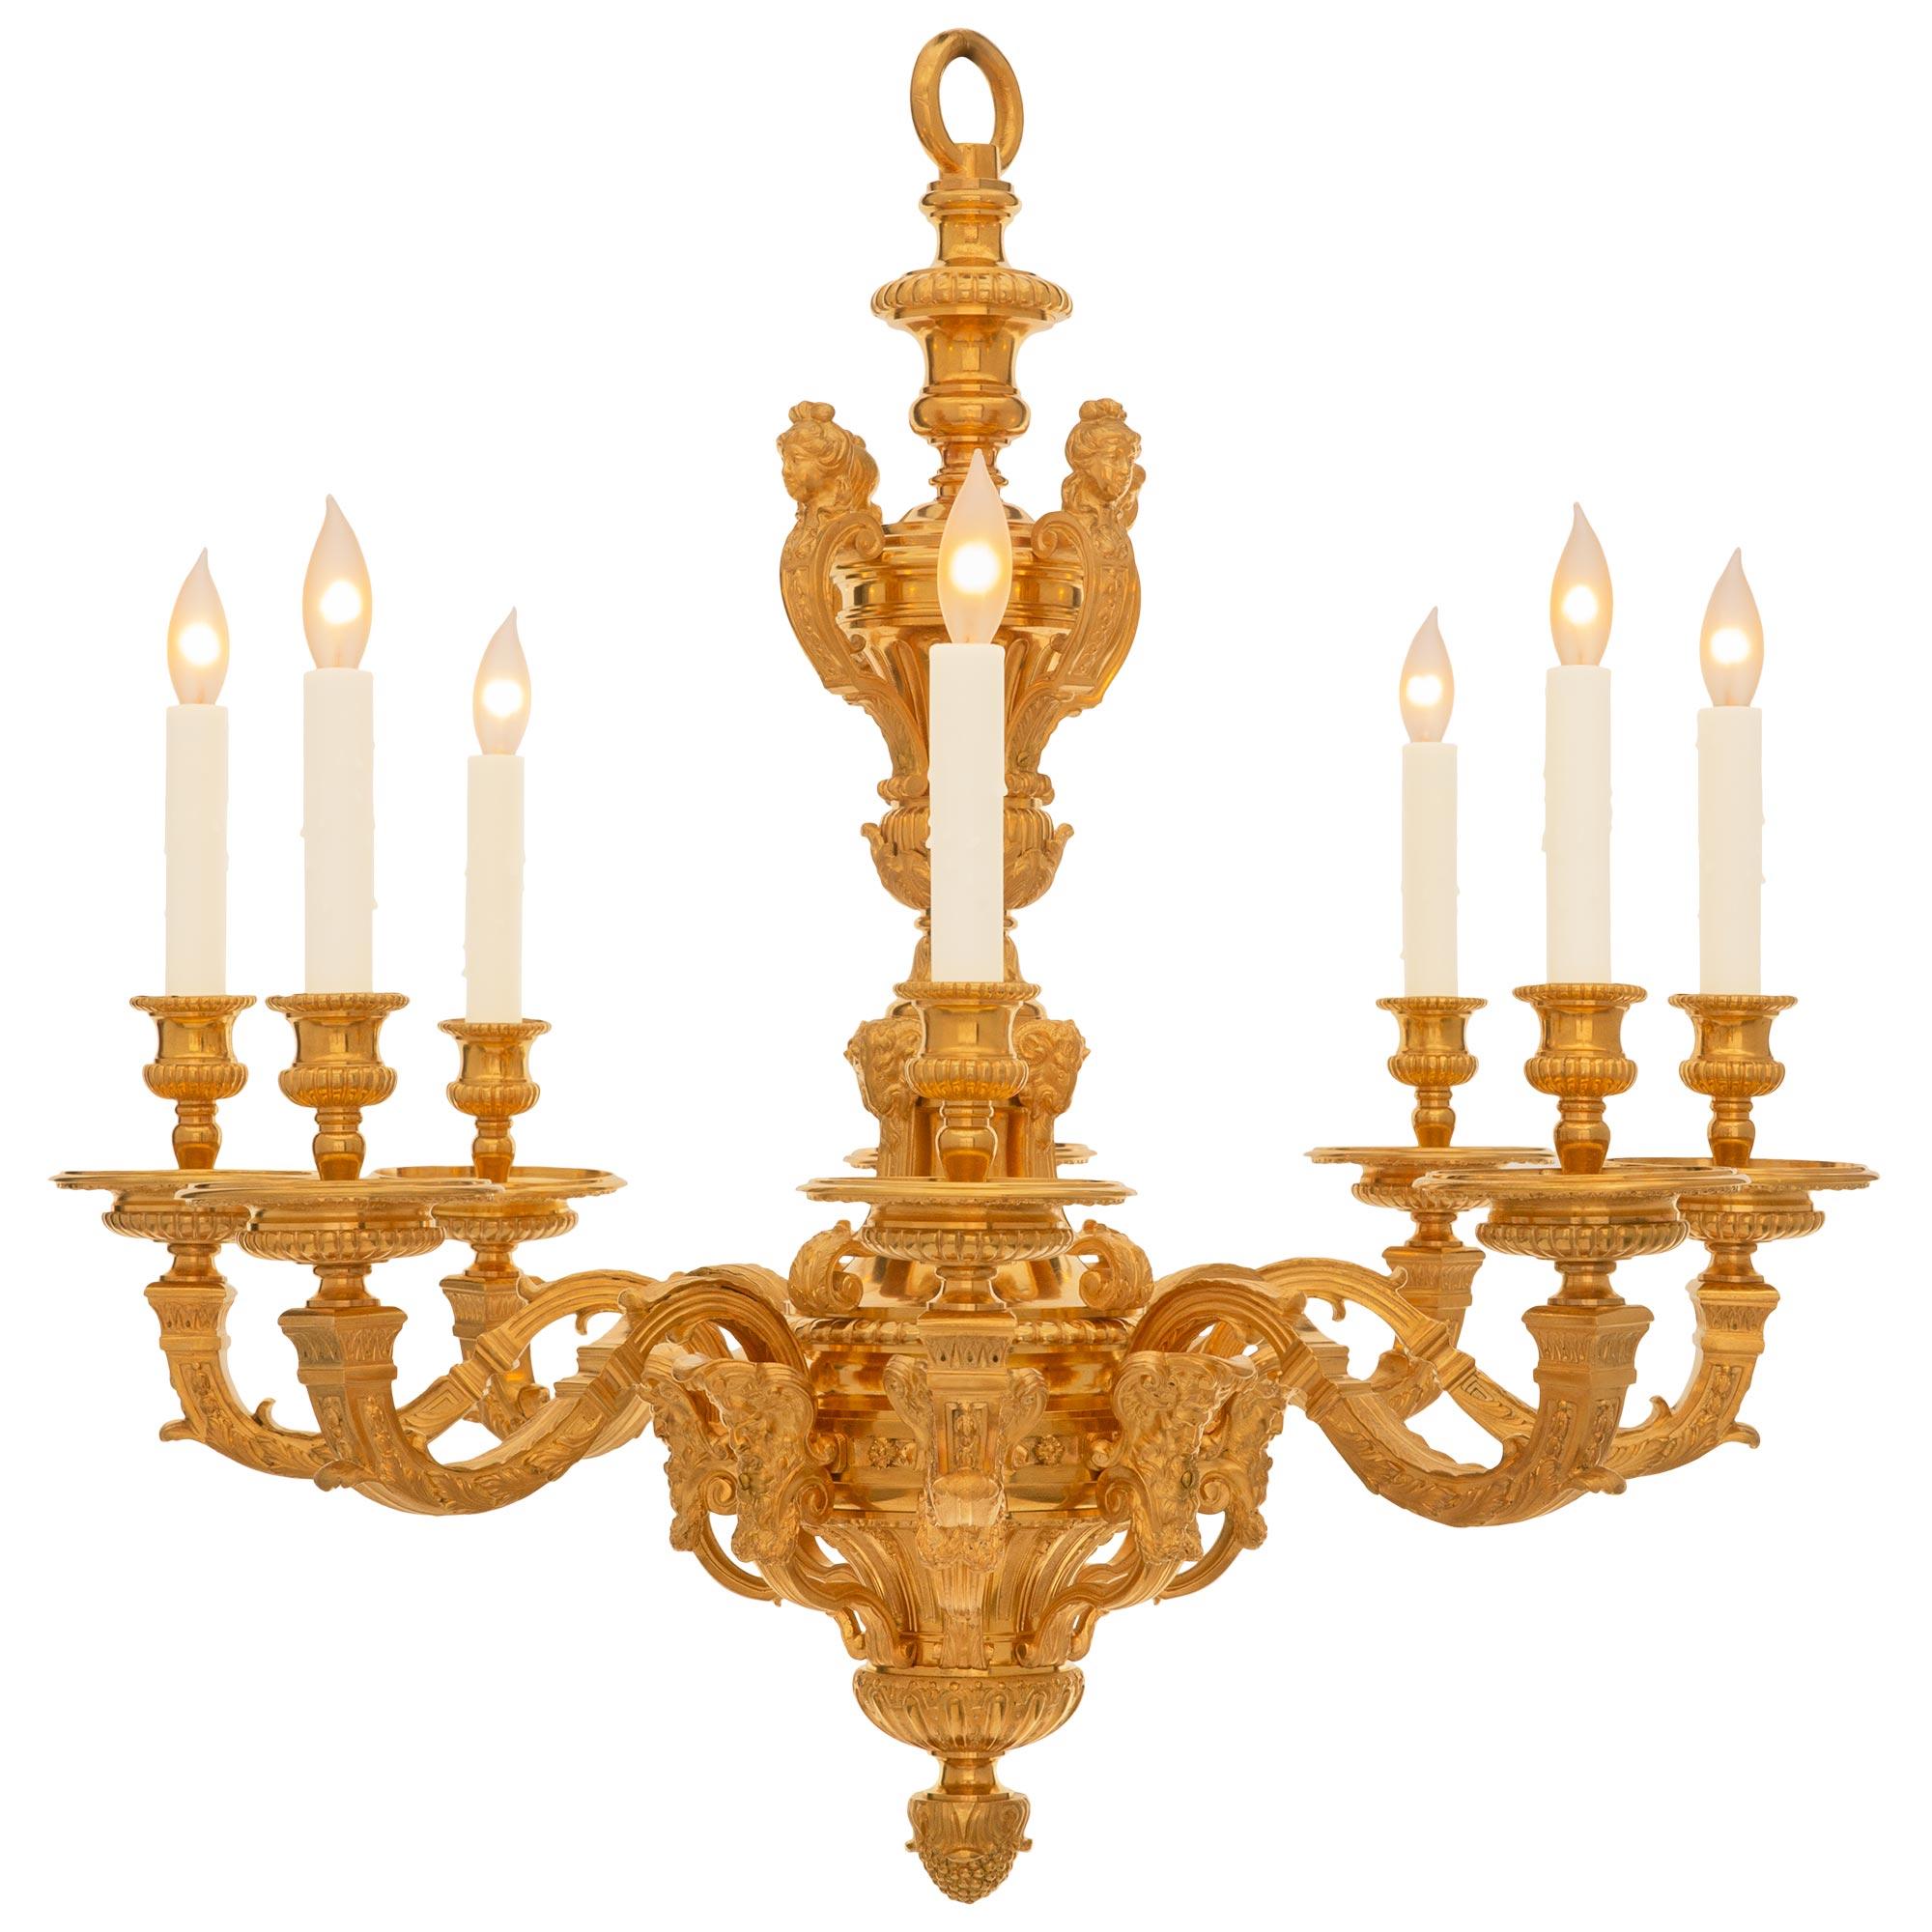 






A handsome and high quality French 19th century Louis XIV st. ormolu chandelier. The eight arm chandelier is centered by a striking bottom inverted foliate acorn finial below reeded designs from where the arms branch out. Each elegantly